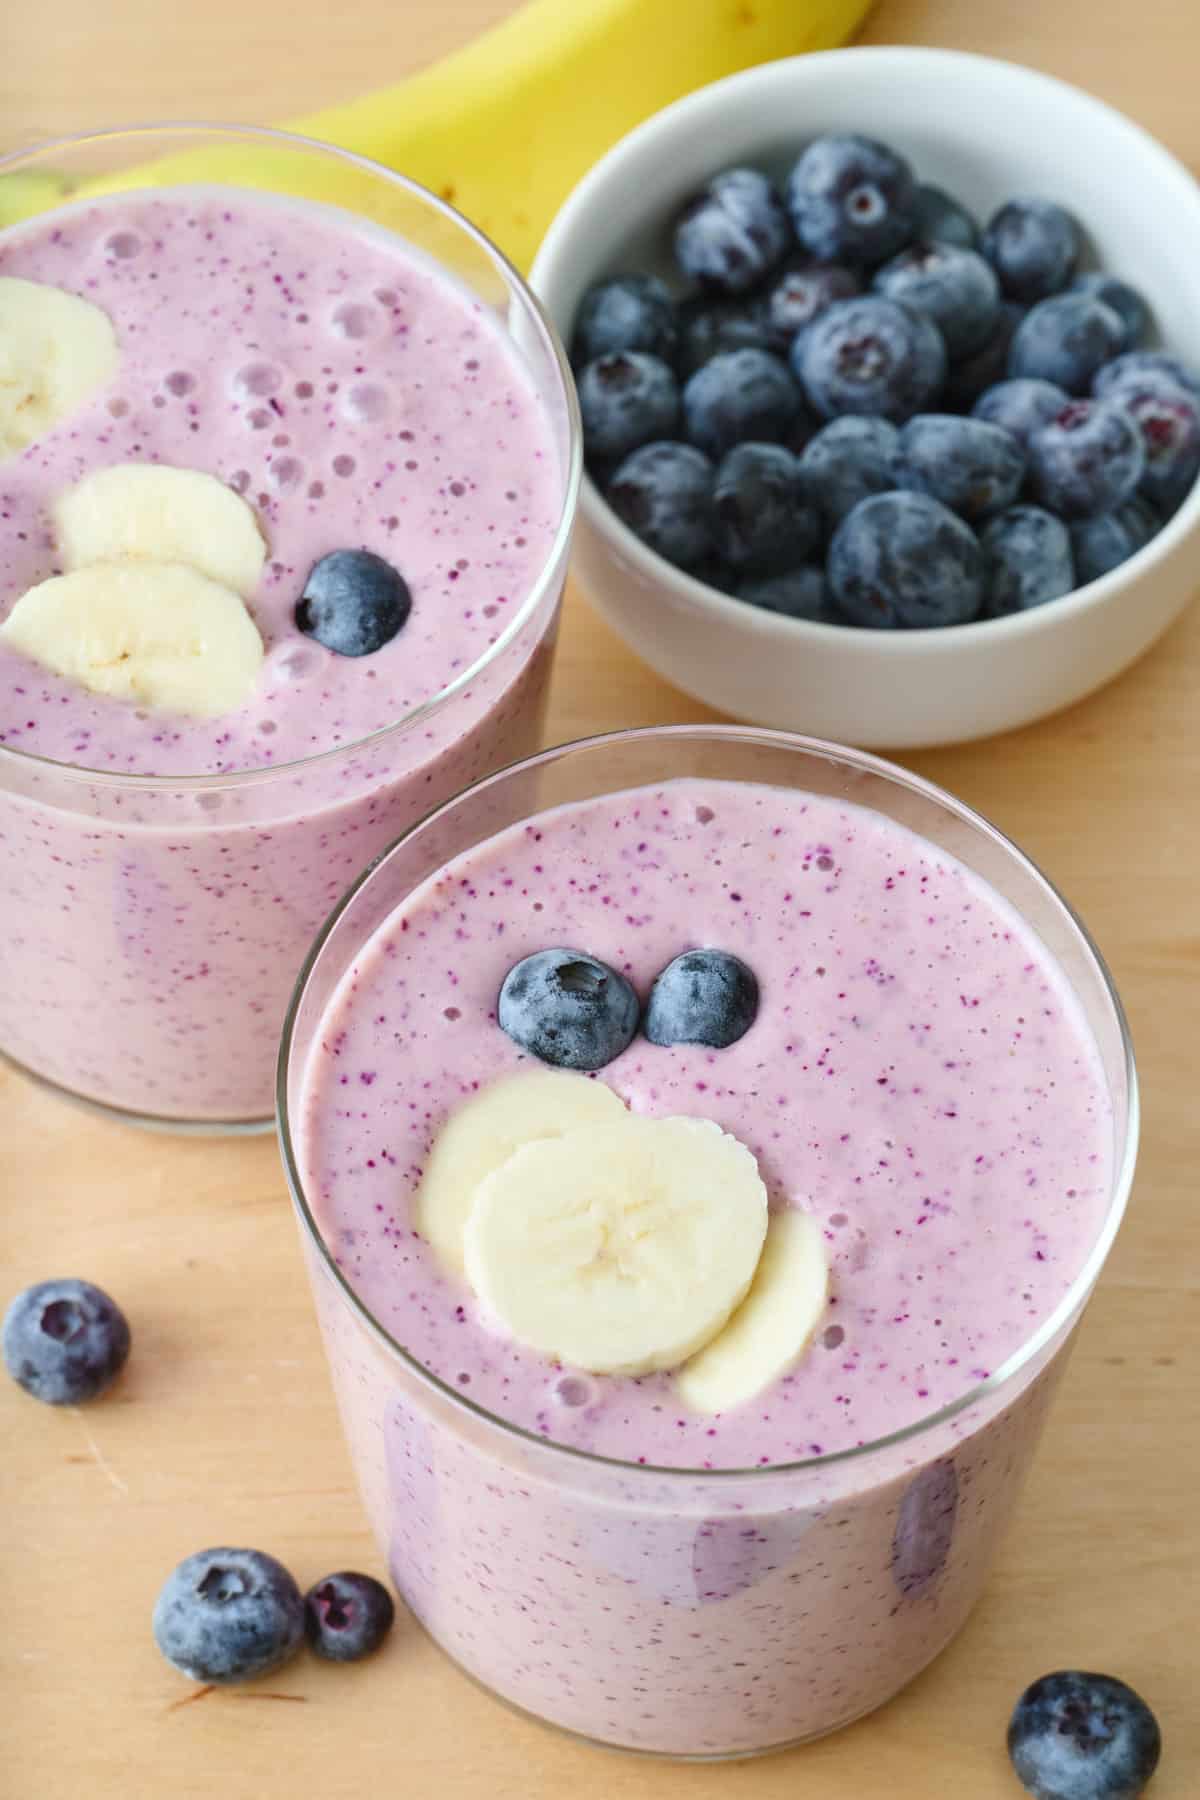 Two glasses of blueberry banana smoothie with a small bowl of fresh blueberries and a whole banana nearby.